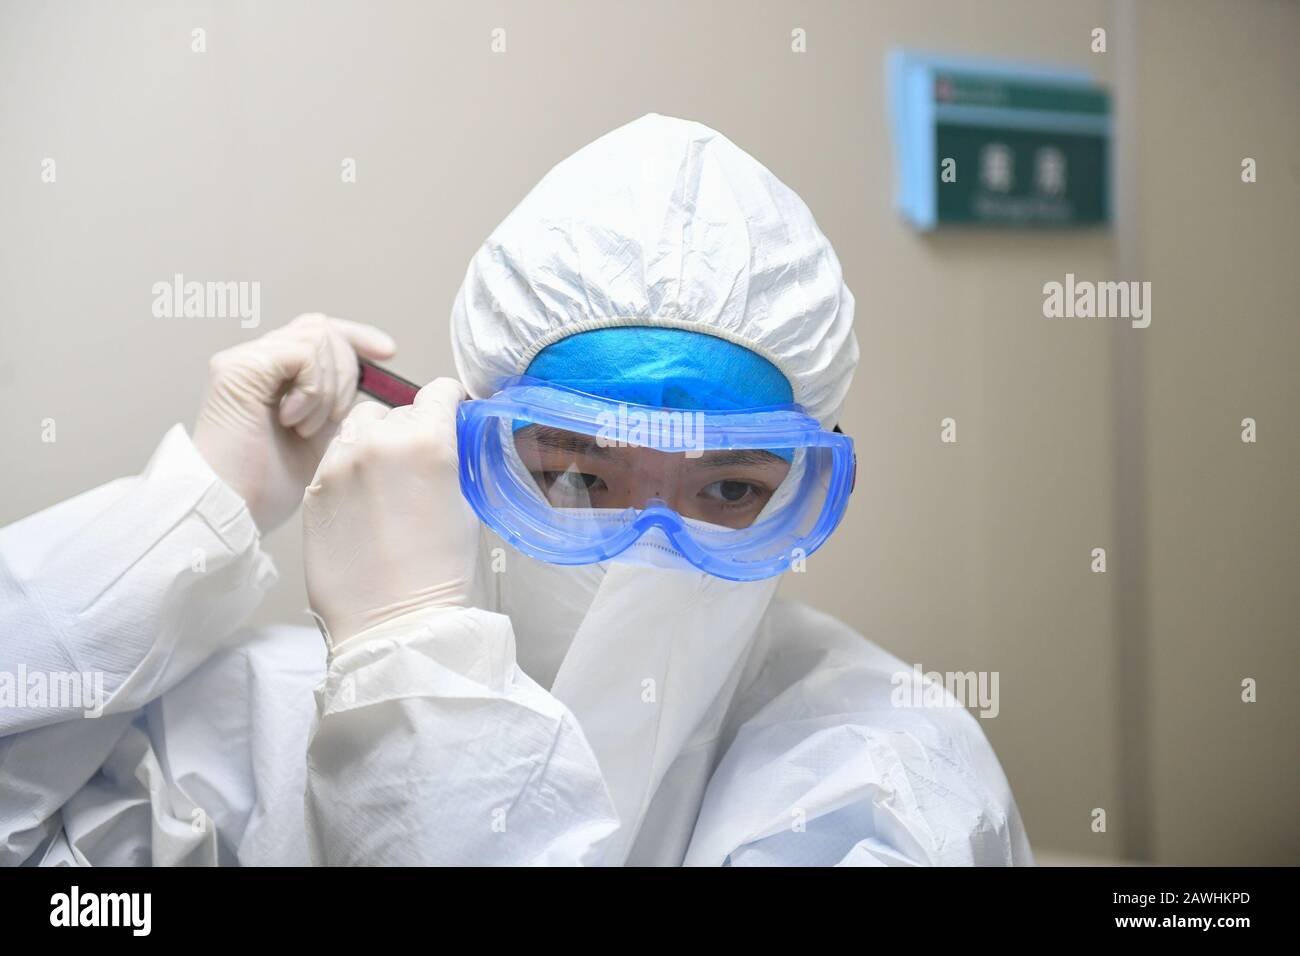 (200209) -- CHANGSHA, Feb. 9, 2020 (Xinhua) -- Yi Junfeng wears protective goggles at a fever clinic of Hunan People's Hospital in Changsha, central China's Hunan Province, Feb. 7, 2020. Amid the current novel coronavirus outbreak, 22-year-old male nurse Yi Junfeng has volunteered to join the battle against the epidemic. After a series of professional trainings, he now works as a front-line fever clinic nurse at Hunan People's Hospital in Changsha. Yi believes that a male nurse has comparative advantages in terms of physical strength and etc, and can play an important role in combating contagi Stock Photo